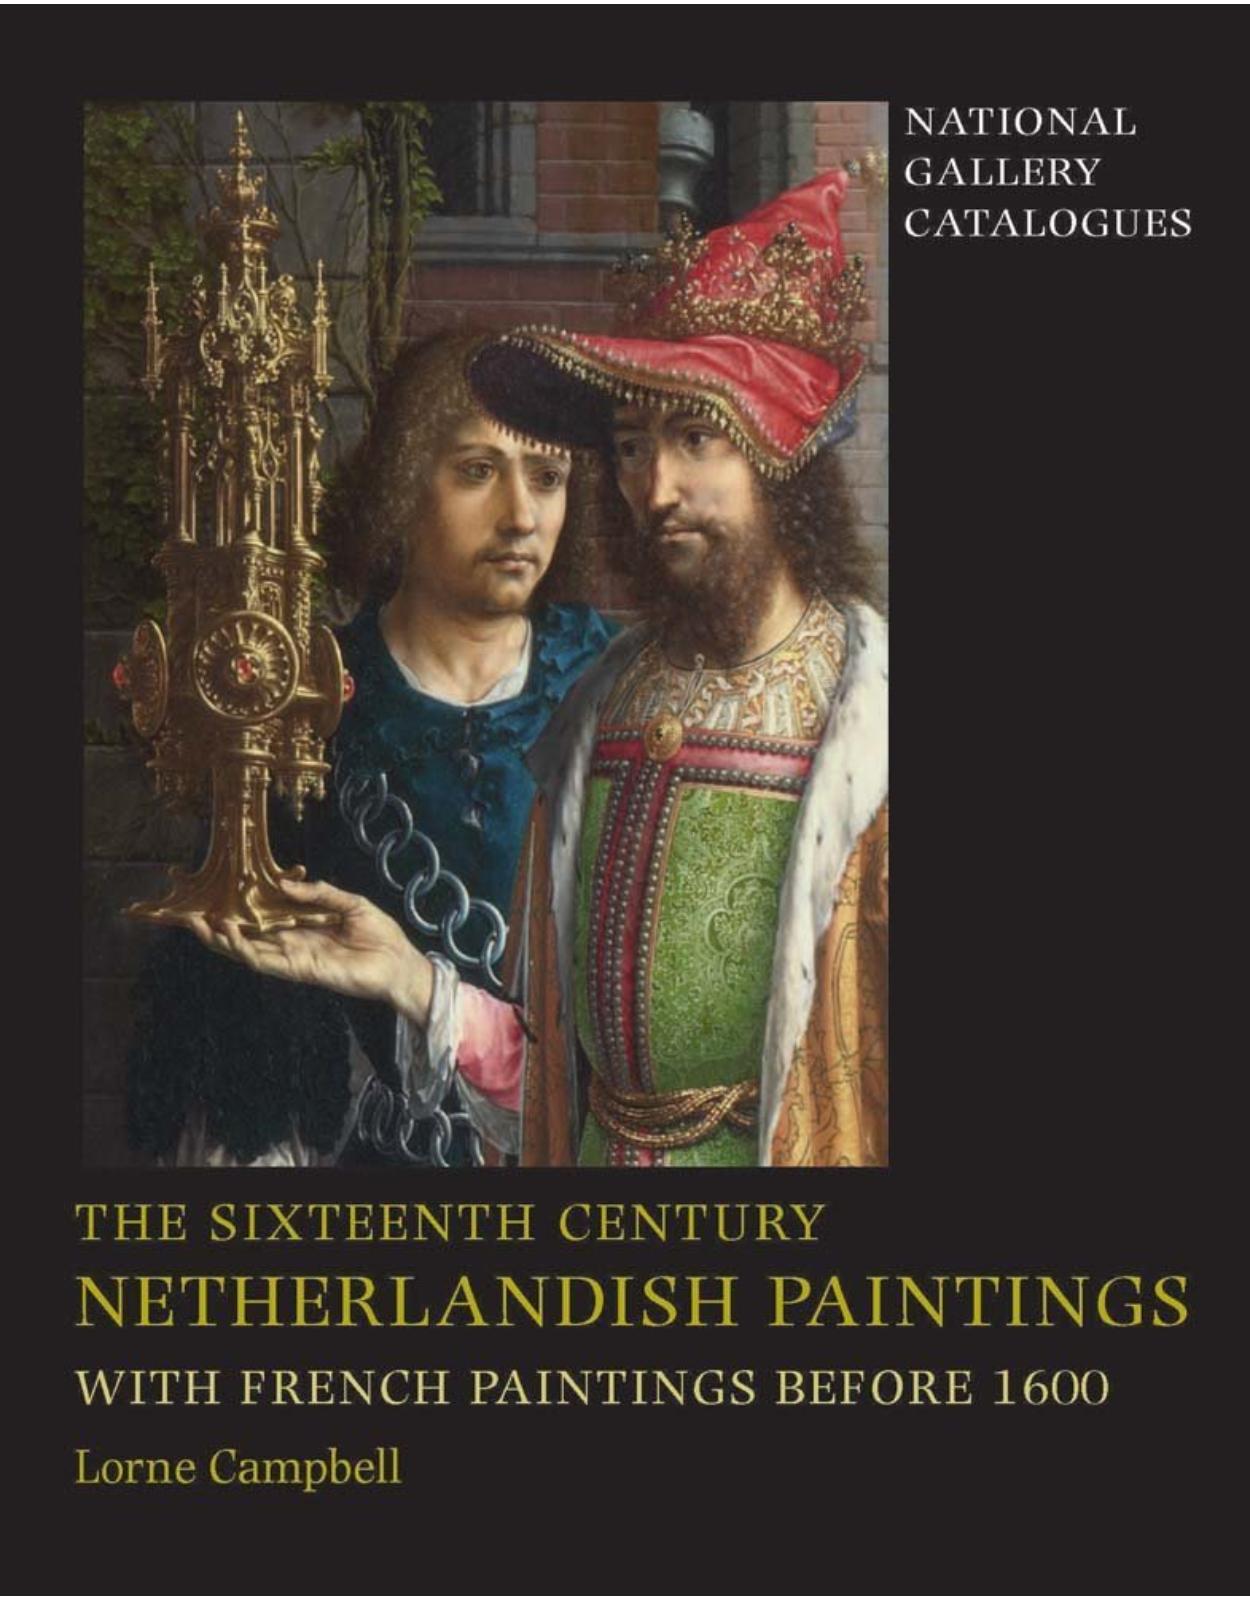 Sixteenth Century Netherlandish Paintings, with French Paintings Before 1600.